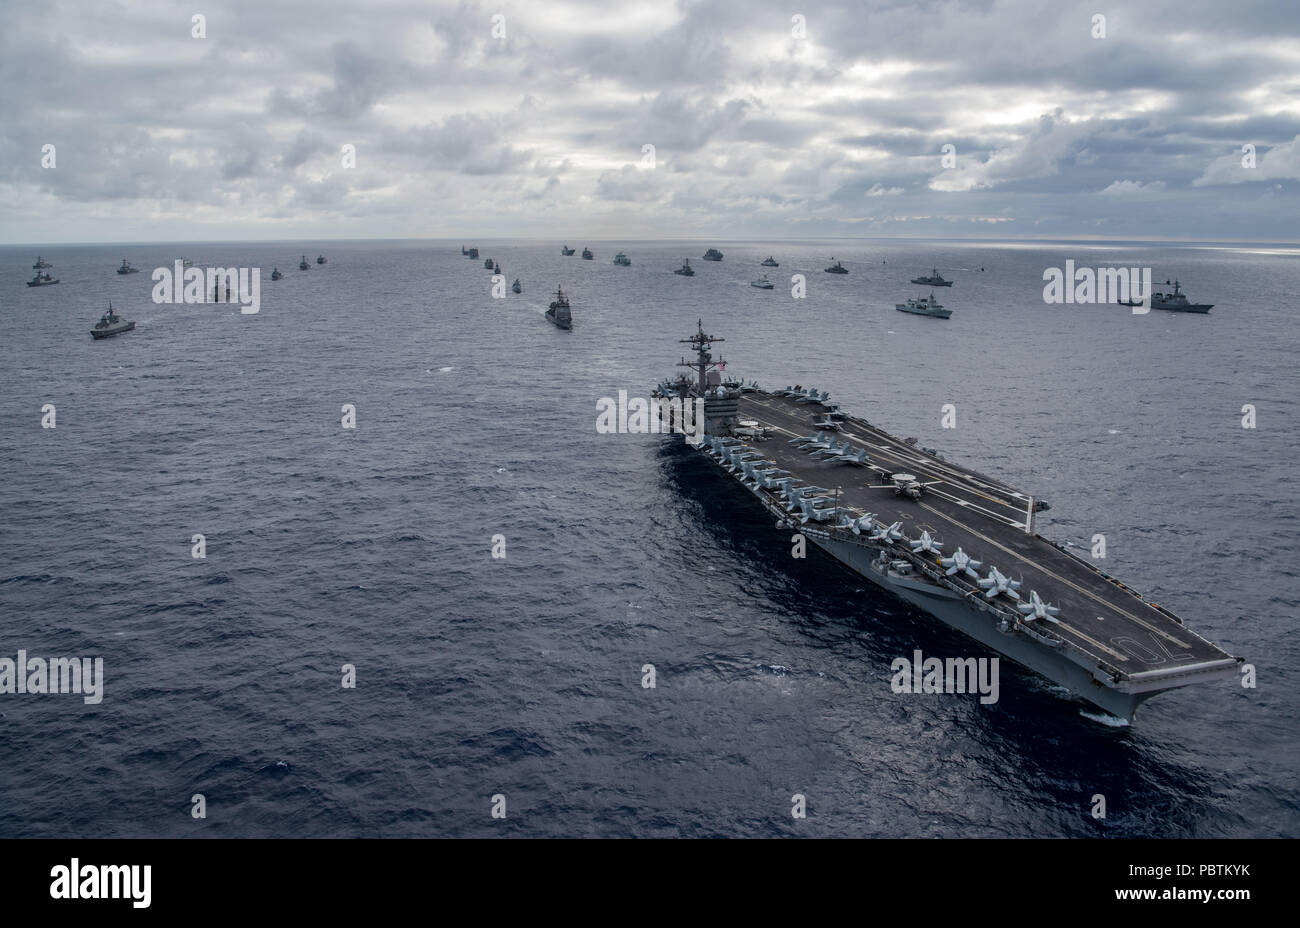 180726-N-MT837-2267 PACIFIC OCEAN (July 26, 2018) Navy ships assemble to form the multinational fleet for a photo exercise off the coast of Hawaii during the Rim of Pacific (RIMPAC) exercise, July 26. Twenty-six nations, more than 45 ships and submarines, about 200 aircraft and 25,000 personnel are participating in RIMPAC from June 27 to Aug. 2 in and around the Hawaiian Islands and Southern California. The world's largest international maritime exercise, RIMPAC provides a unique training opportunity while fostering and sustaining cooperative relationships between participants critical to ensu Stock Photo